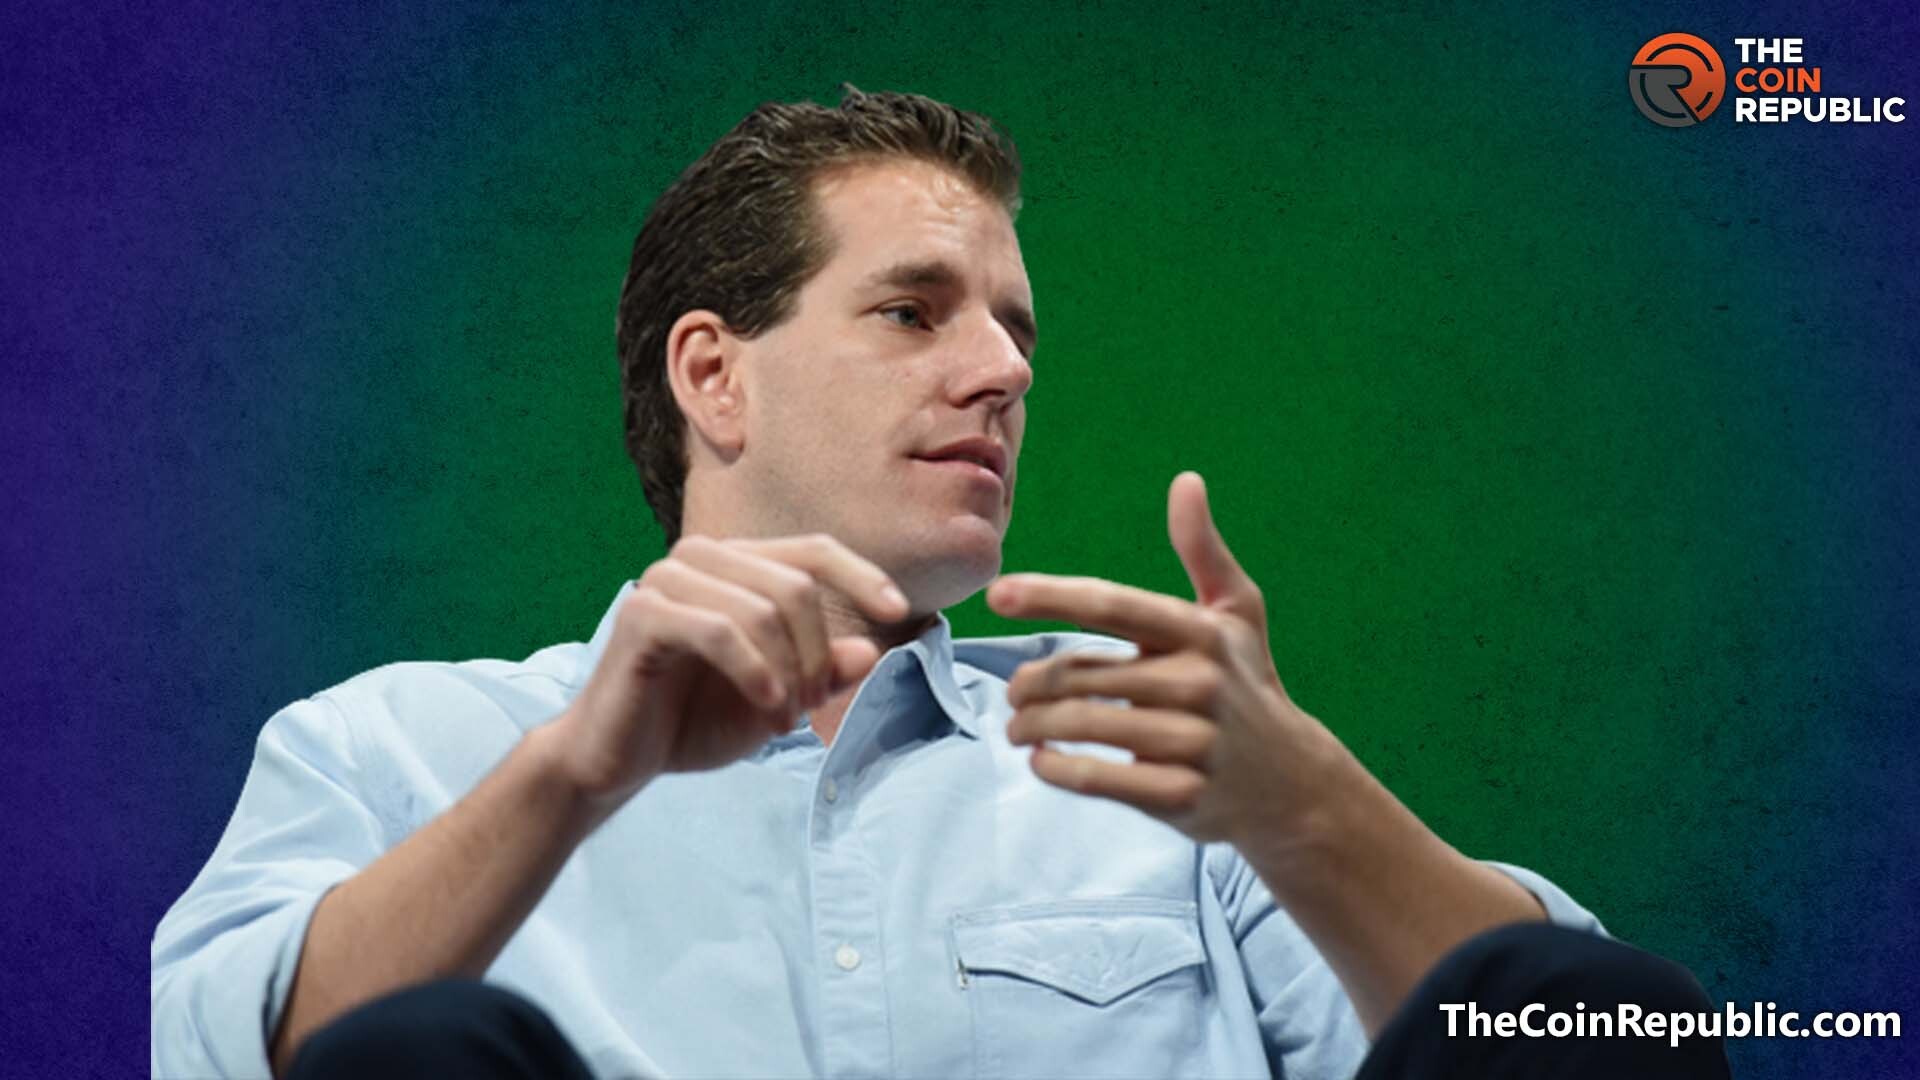 Cameron Winklevoss Accuses Silbert of Hiding Behind Lawyers; Issues Him an Ultimatum